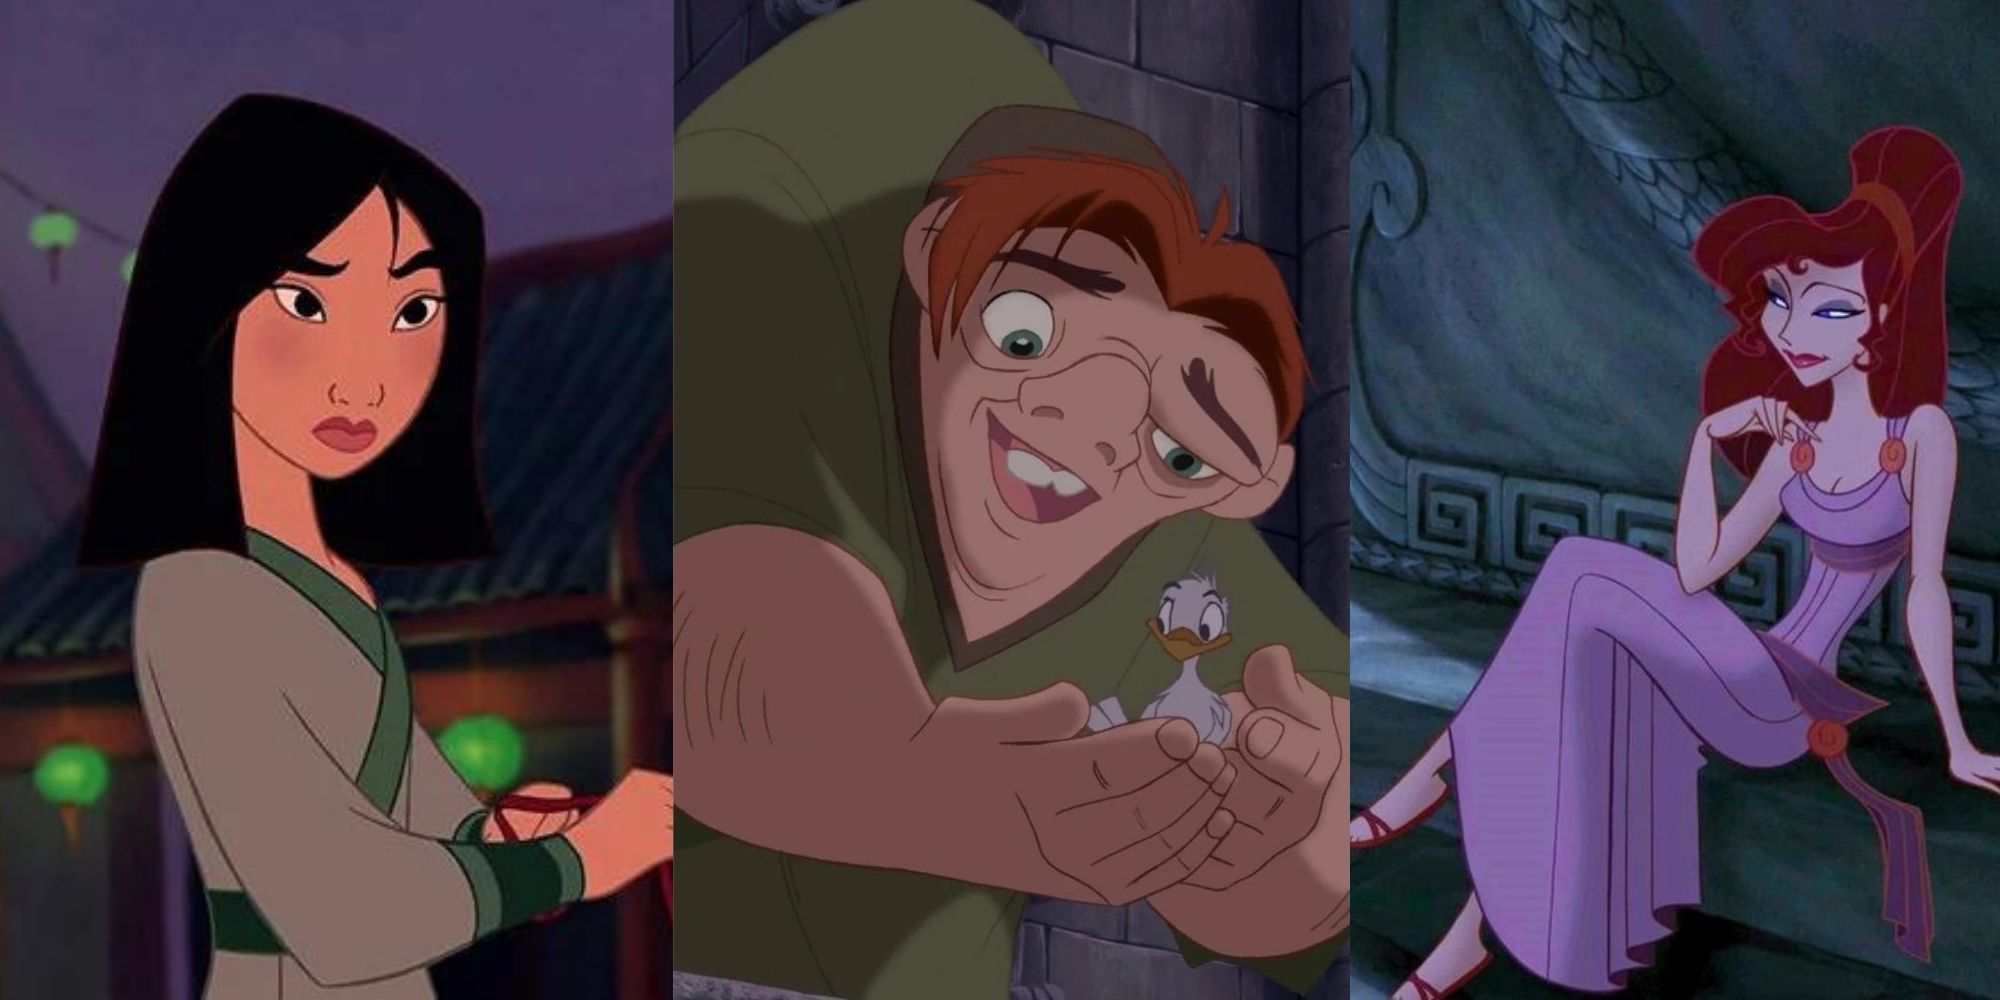 Mulan, The Hunchback of Notre Dame, and Meg from Hercules